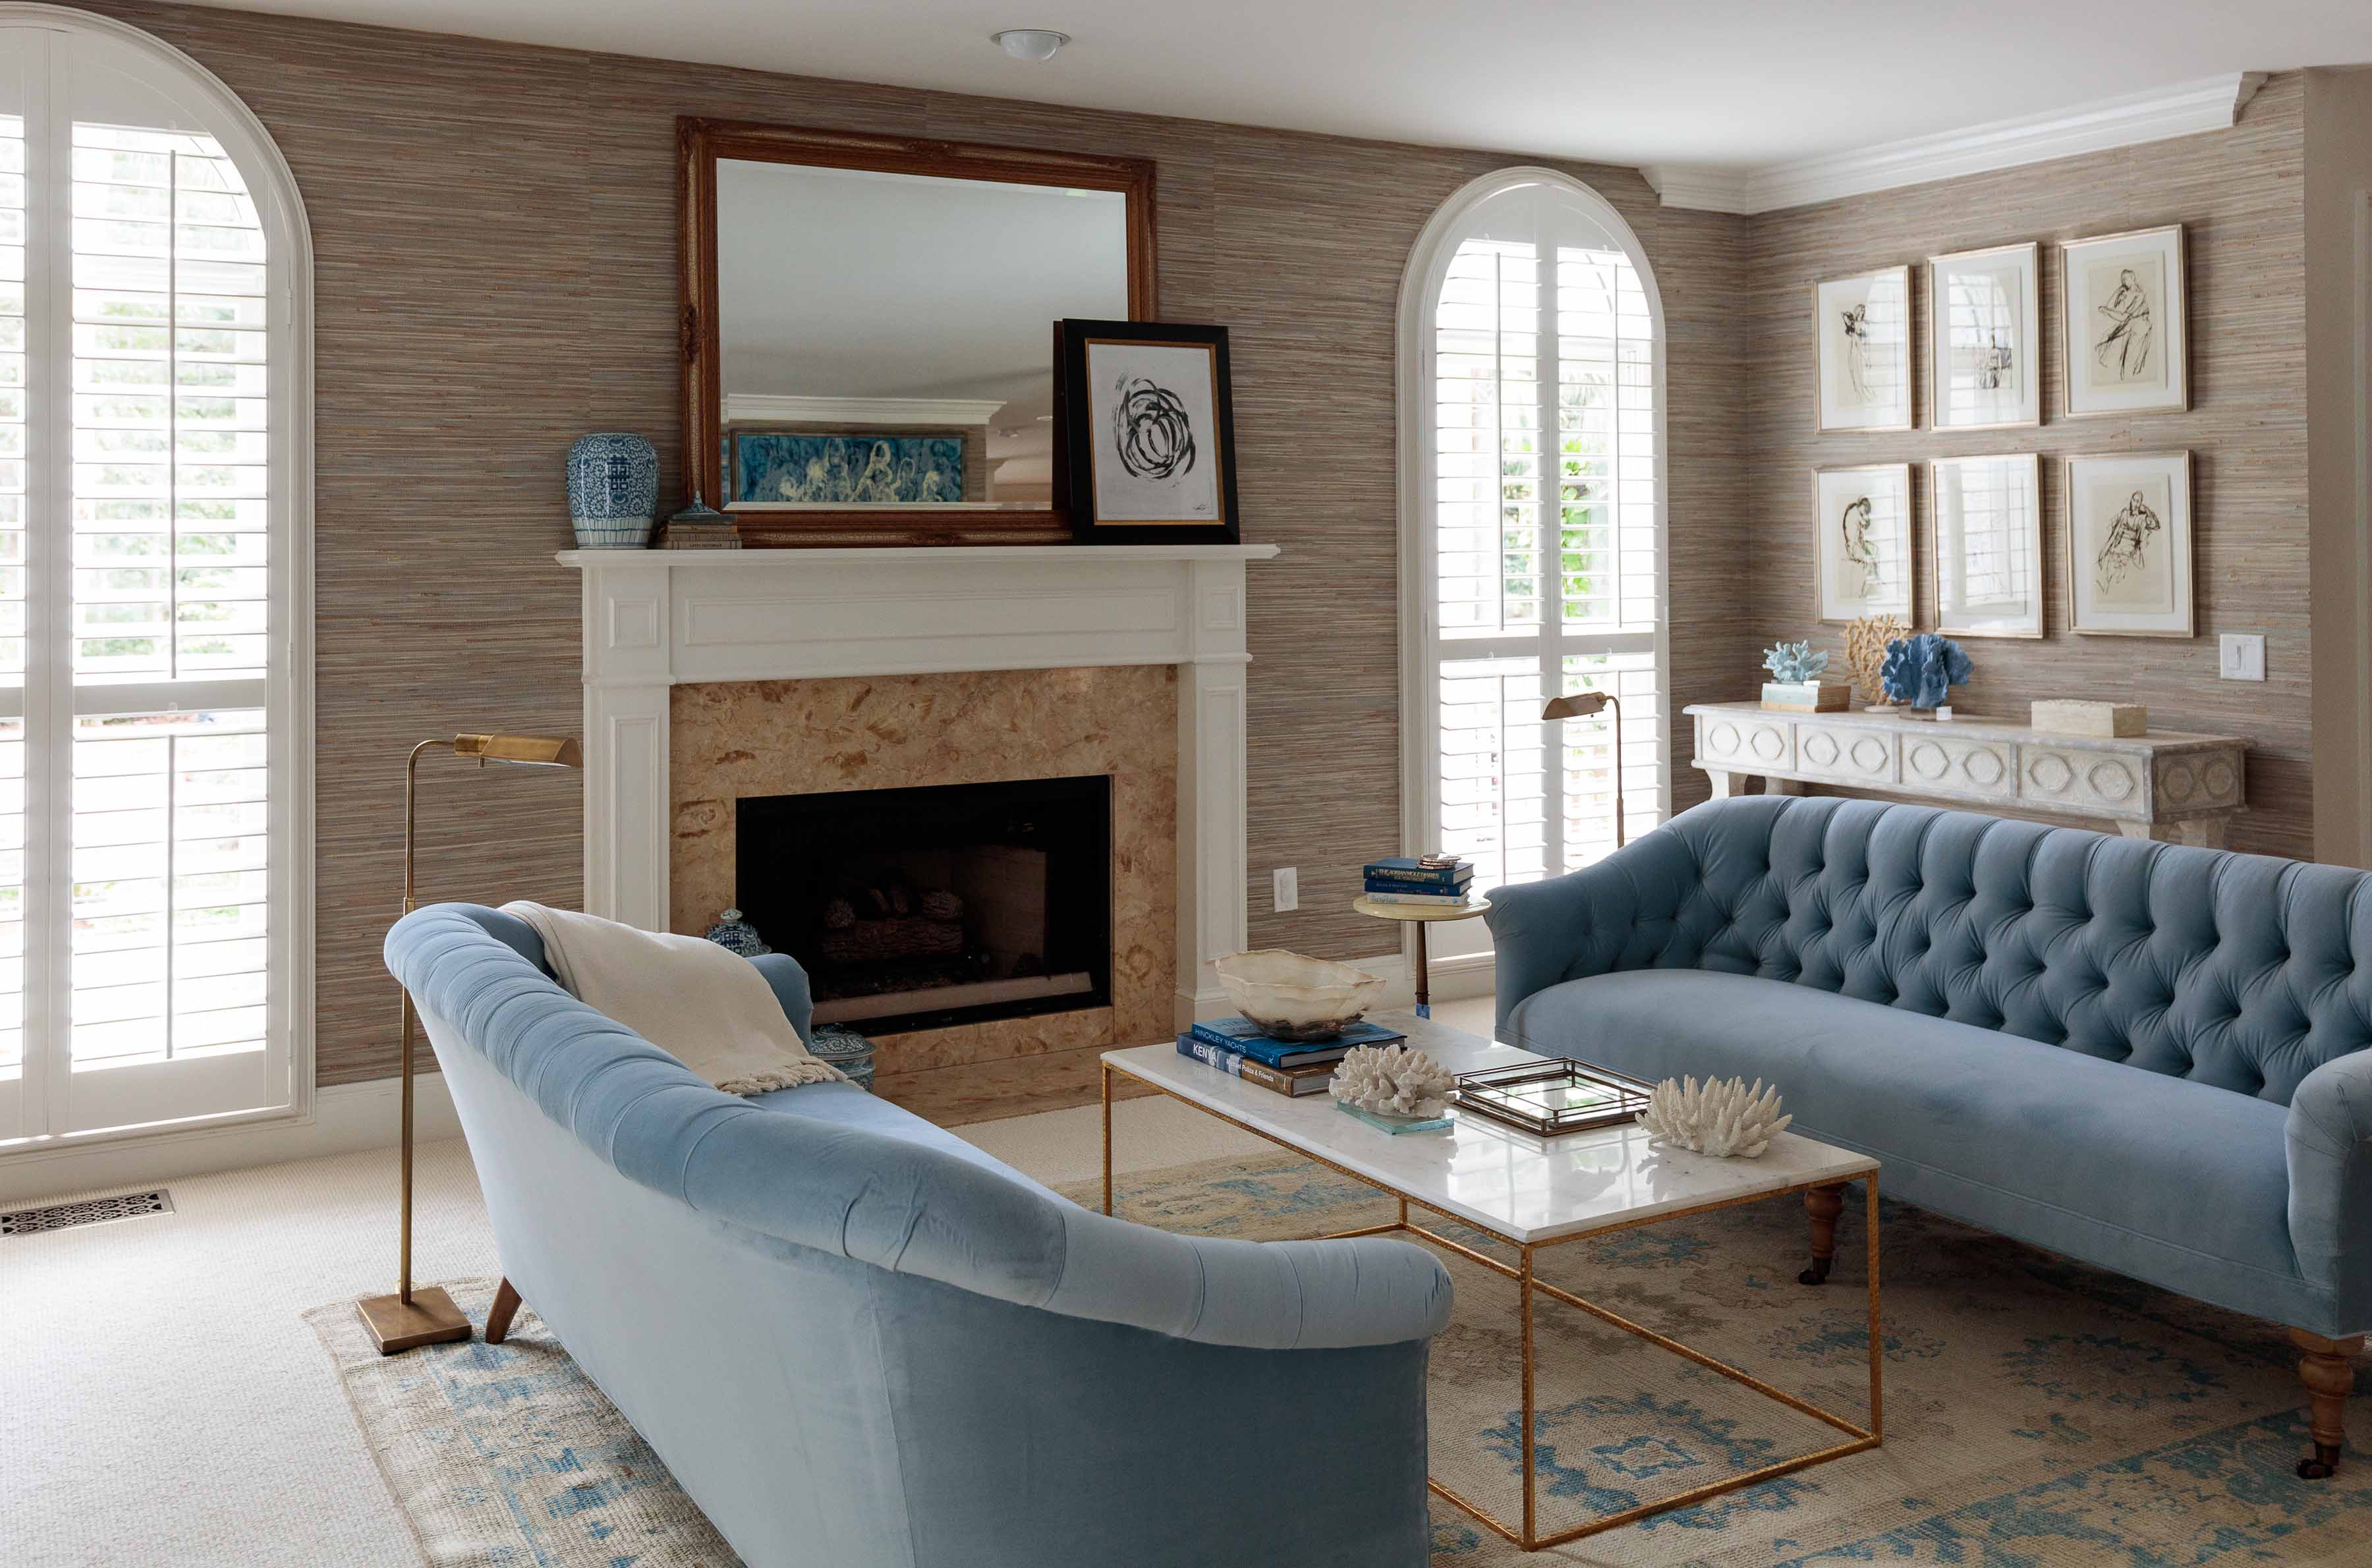 this living room interior design by the J Banks Design Group has a classic sophistication in the furnishings and the color palette